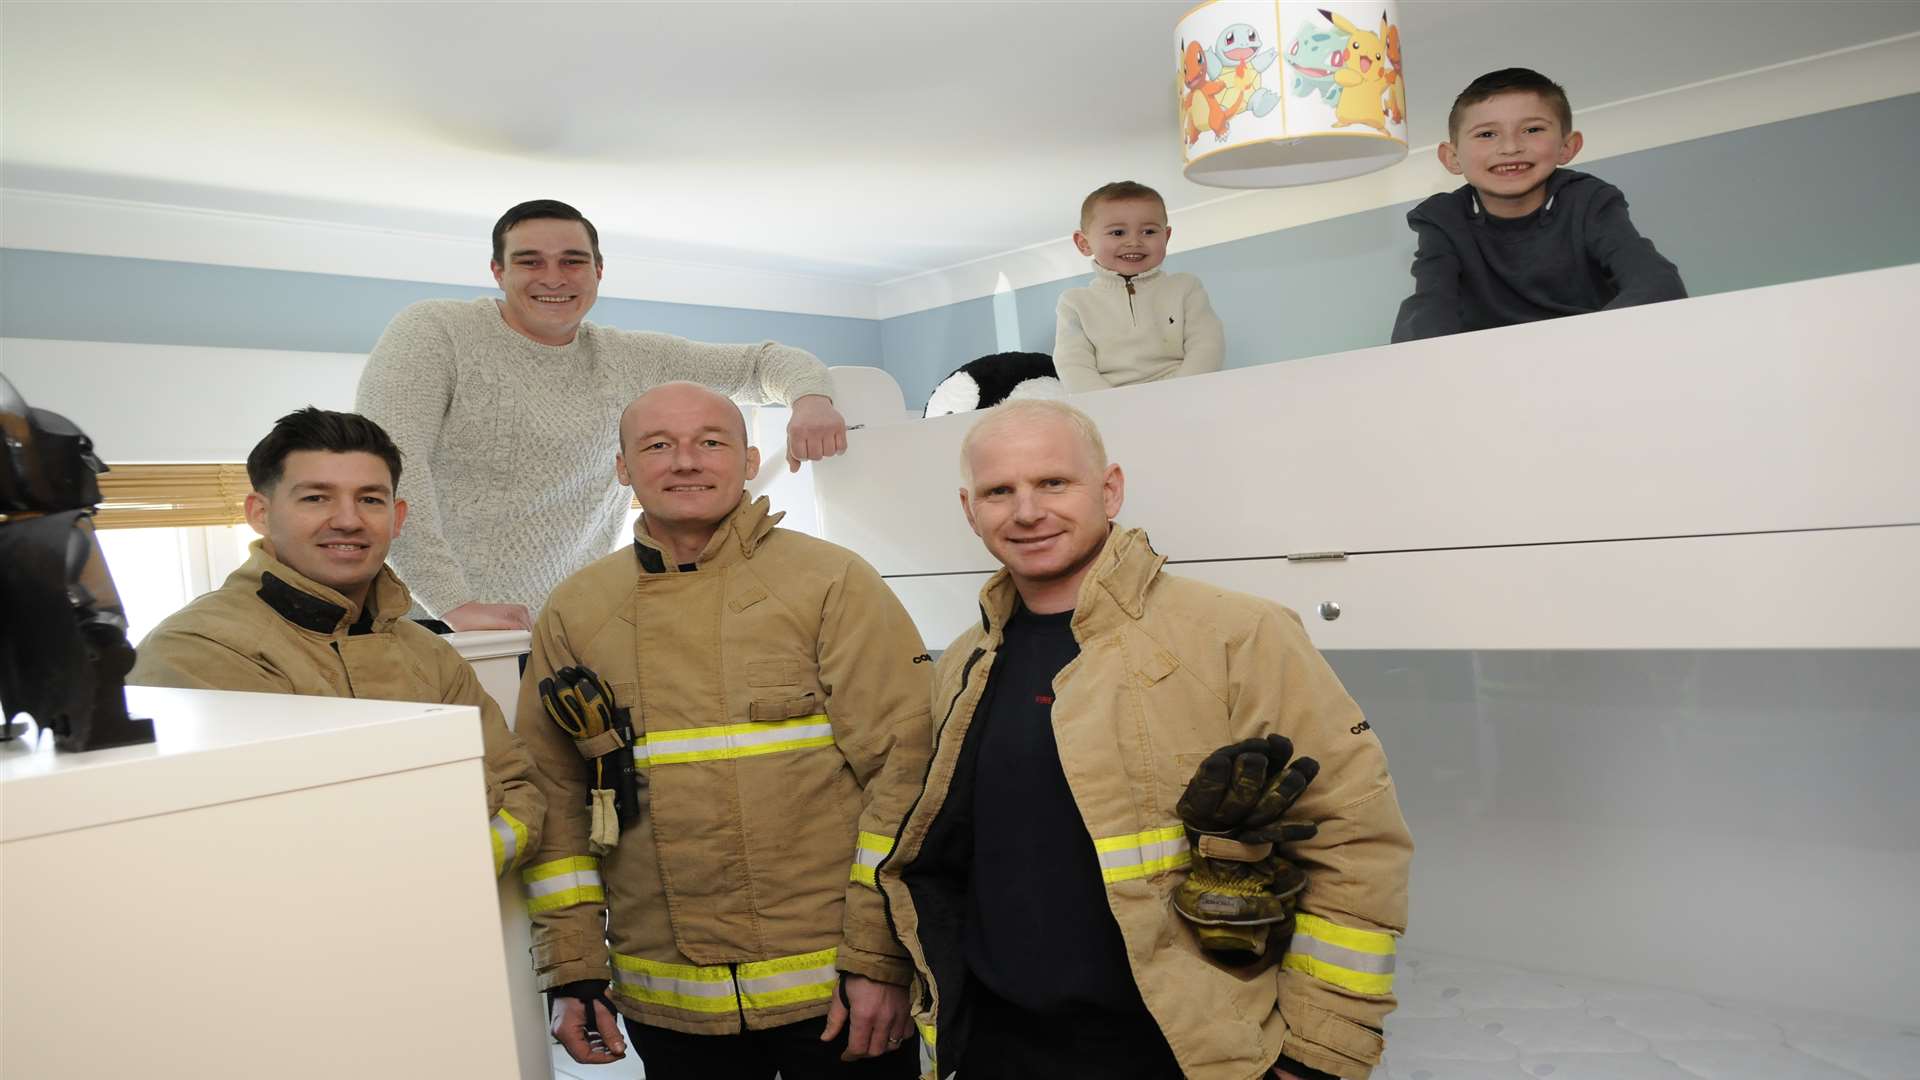 Draven Jefferies, eight, and Rogan, three, with Andy Bradley from Excaliber Carpentry and Joinery, Folkestone watch manager John Howard and firefighters Farrell Cox and Adam Eastwood